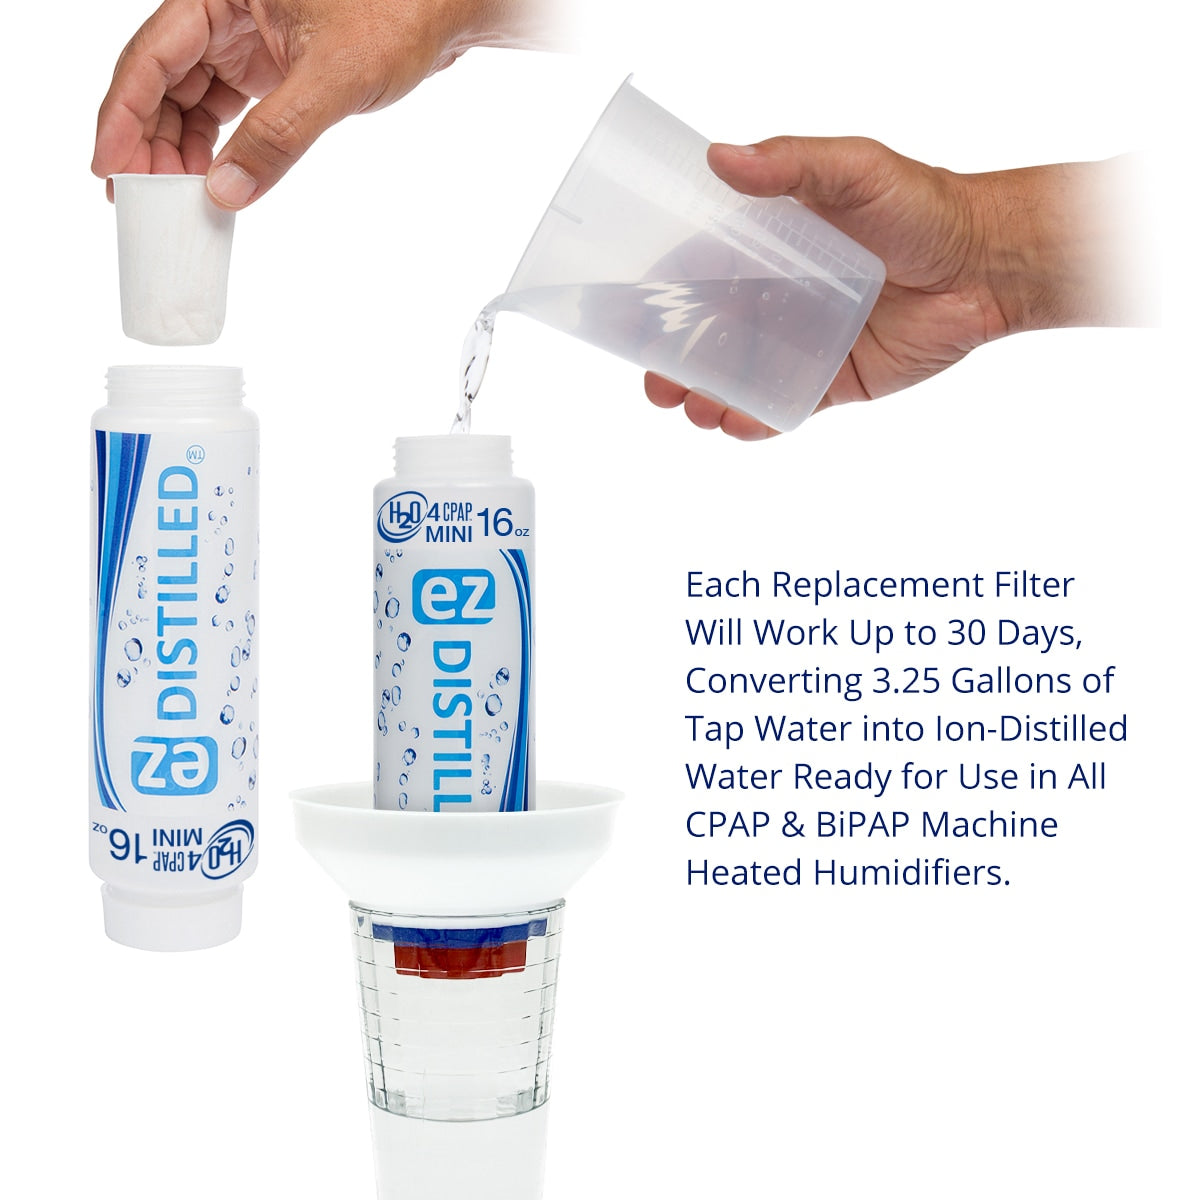 H2O 4 CPAP Mini EZ Distilled Water Filtration System